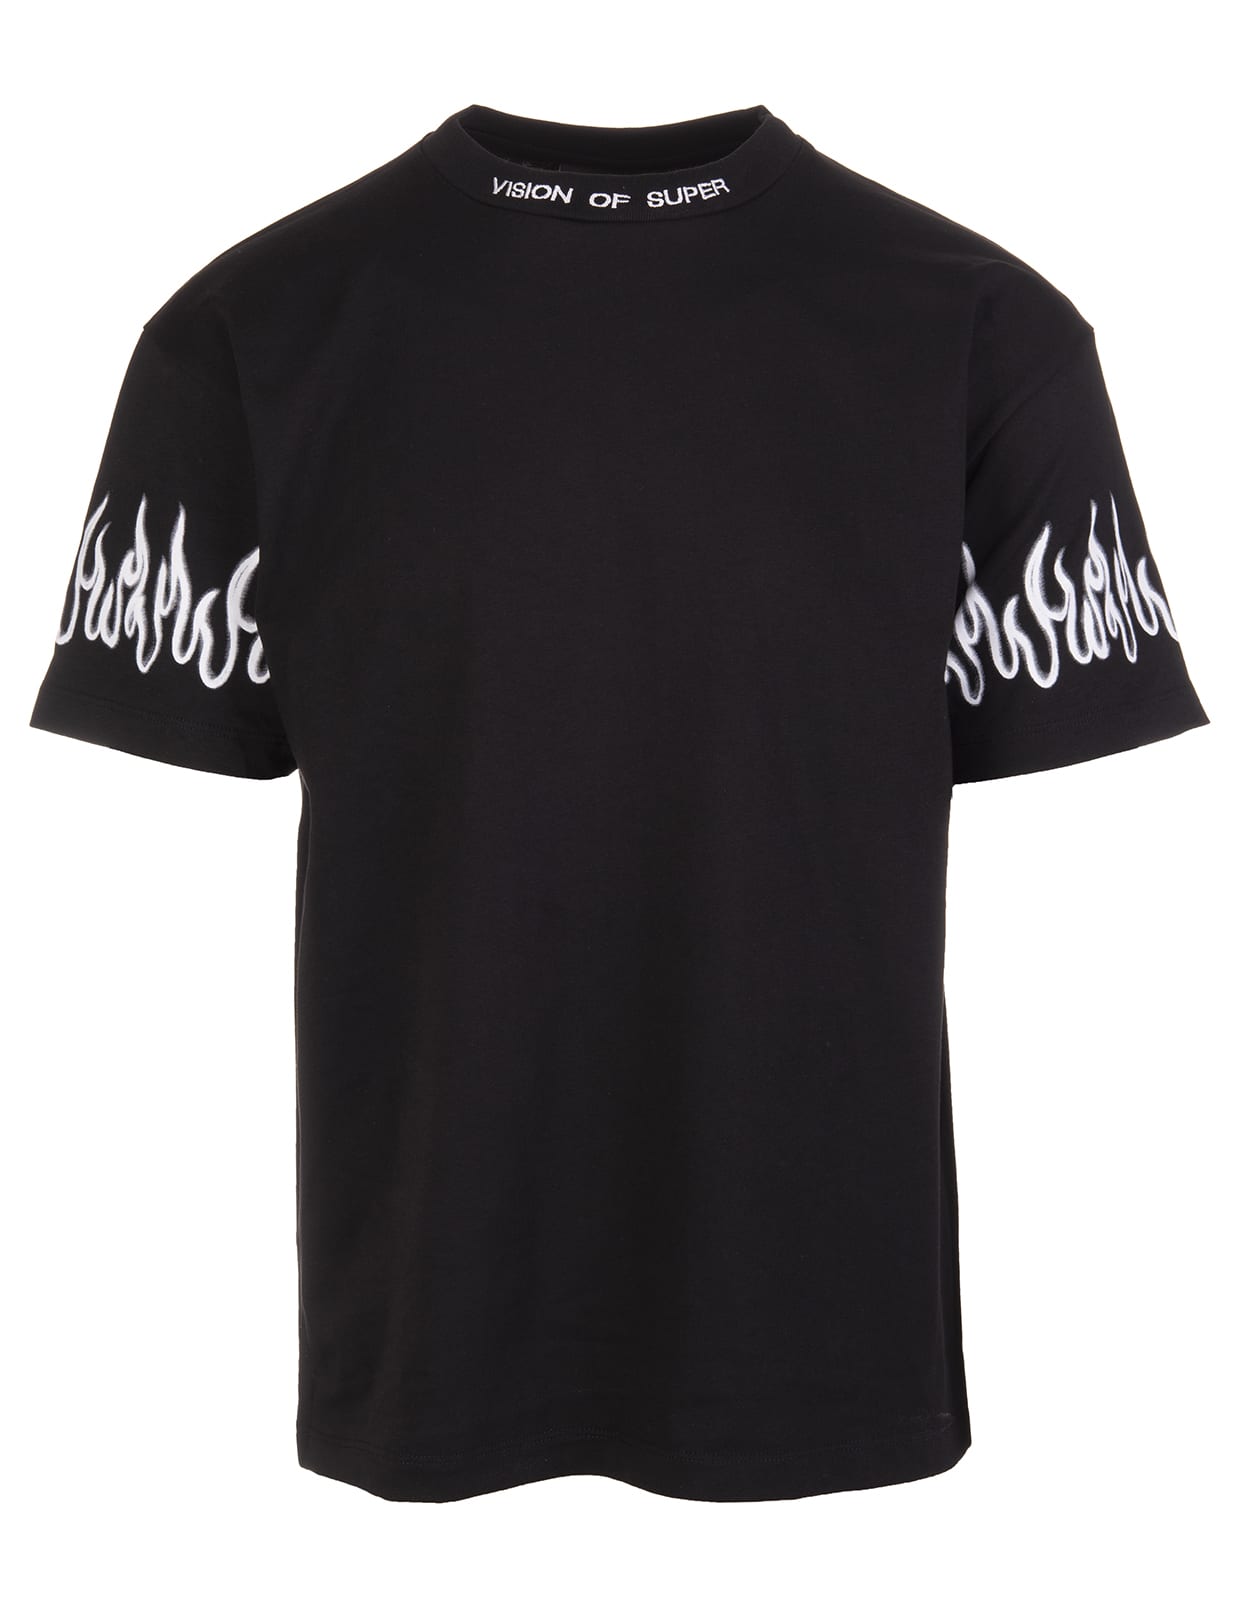 Vision of Super Black Unisex T-shirt With Logo And White Spray Flames Print